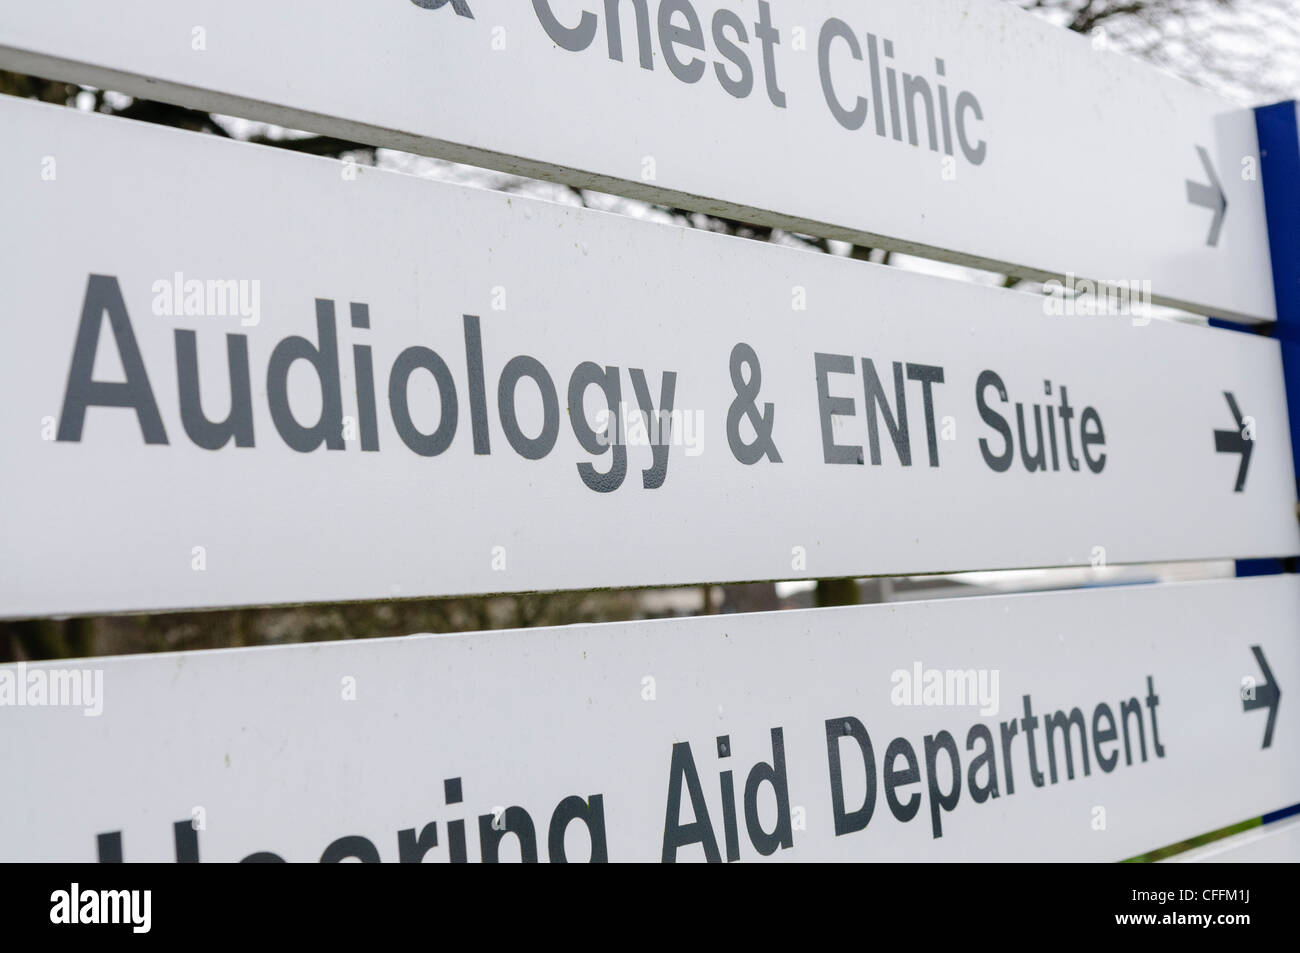 Sign at a hospital for Audiology and ENT Suite Stock Photo